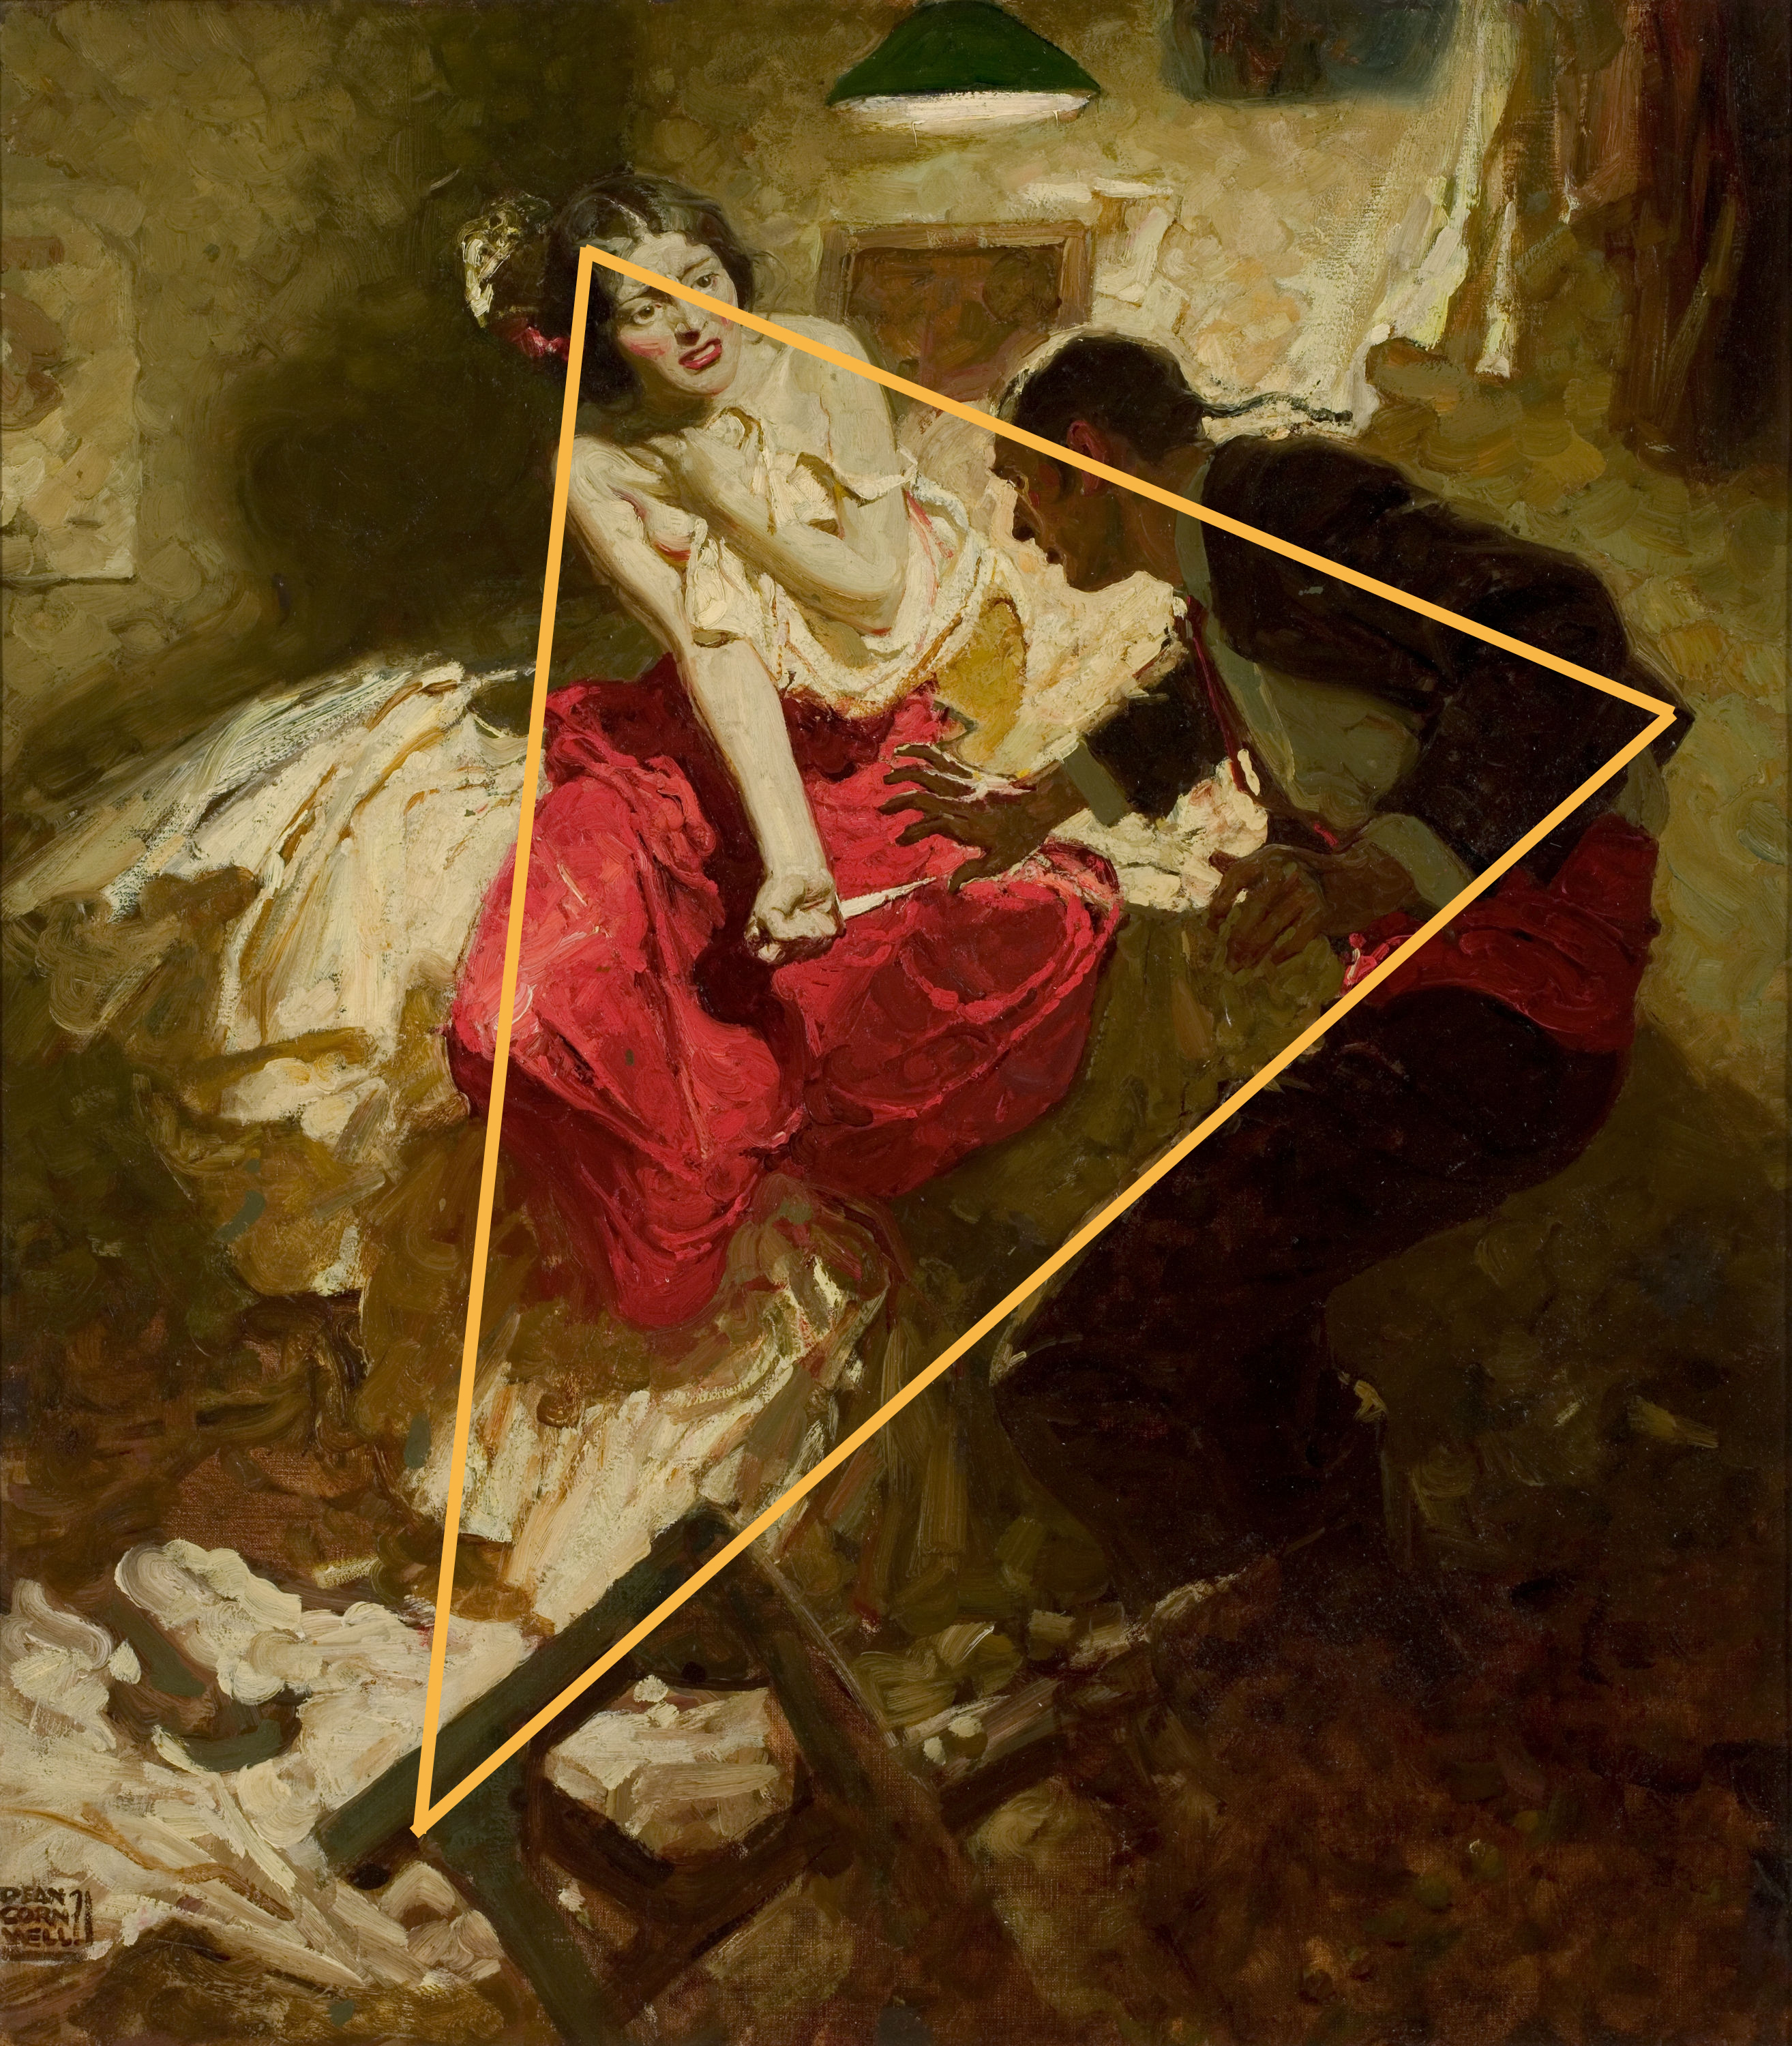 A painting by Dean Cornwell showing a woman with a knife defending herself against a man.